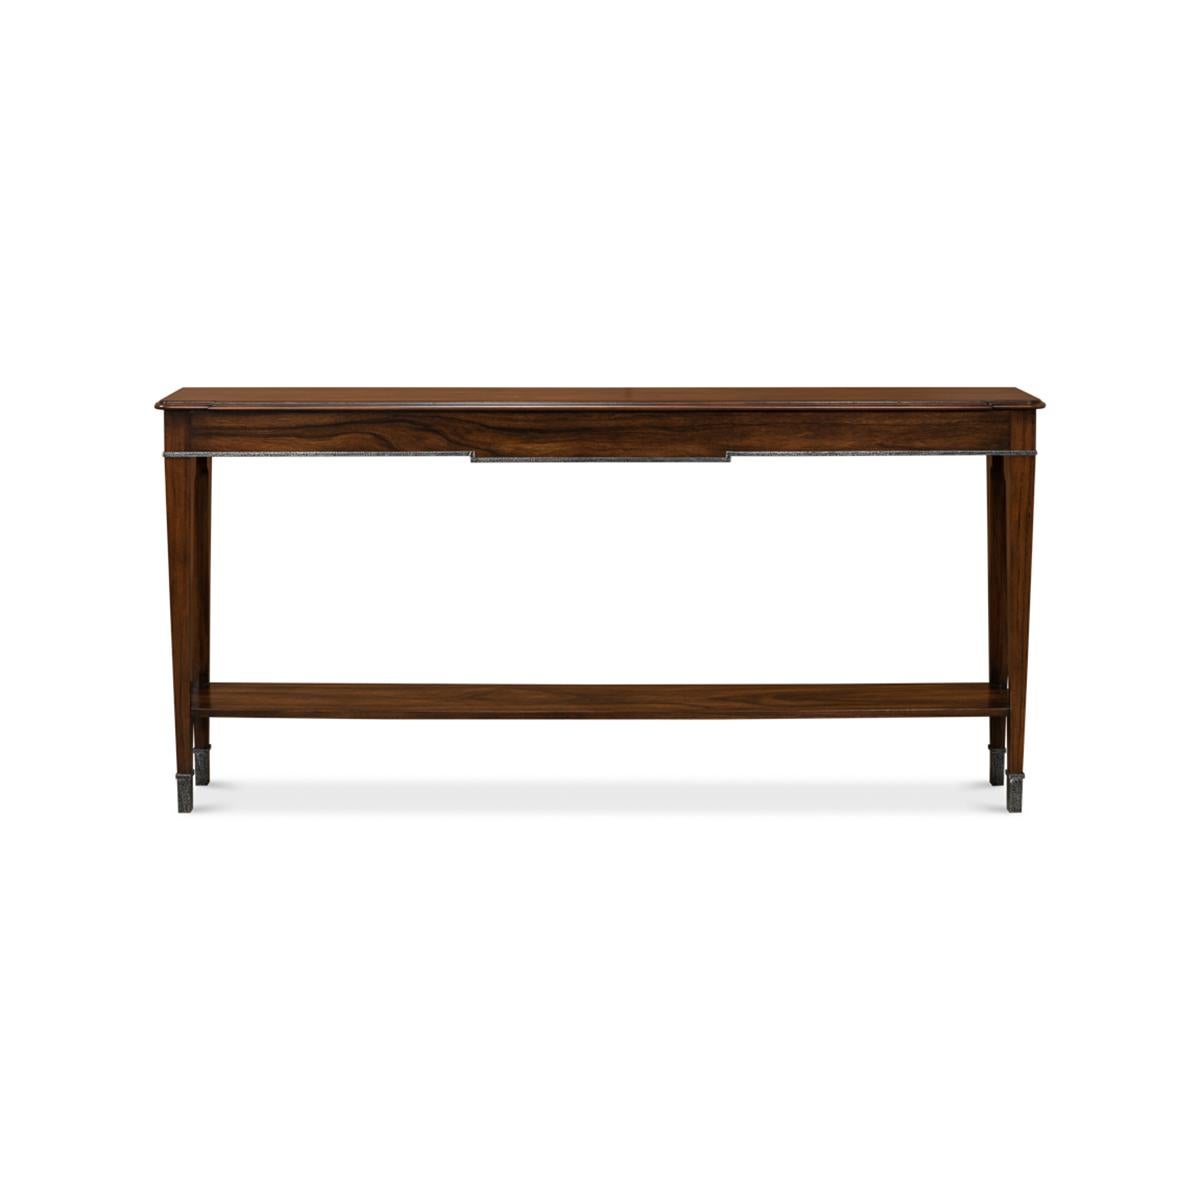 Introducing the NeoClassic Long Console - a stunning piece of furniture that is sure to elevate your interior design. Crafted with premium Paldeo veneers in a rich dark walnut finish, the top of this console boasts a subtle breakfront design that is